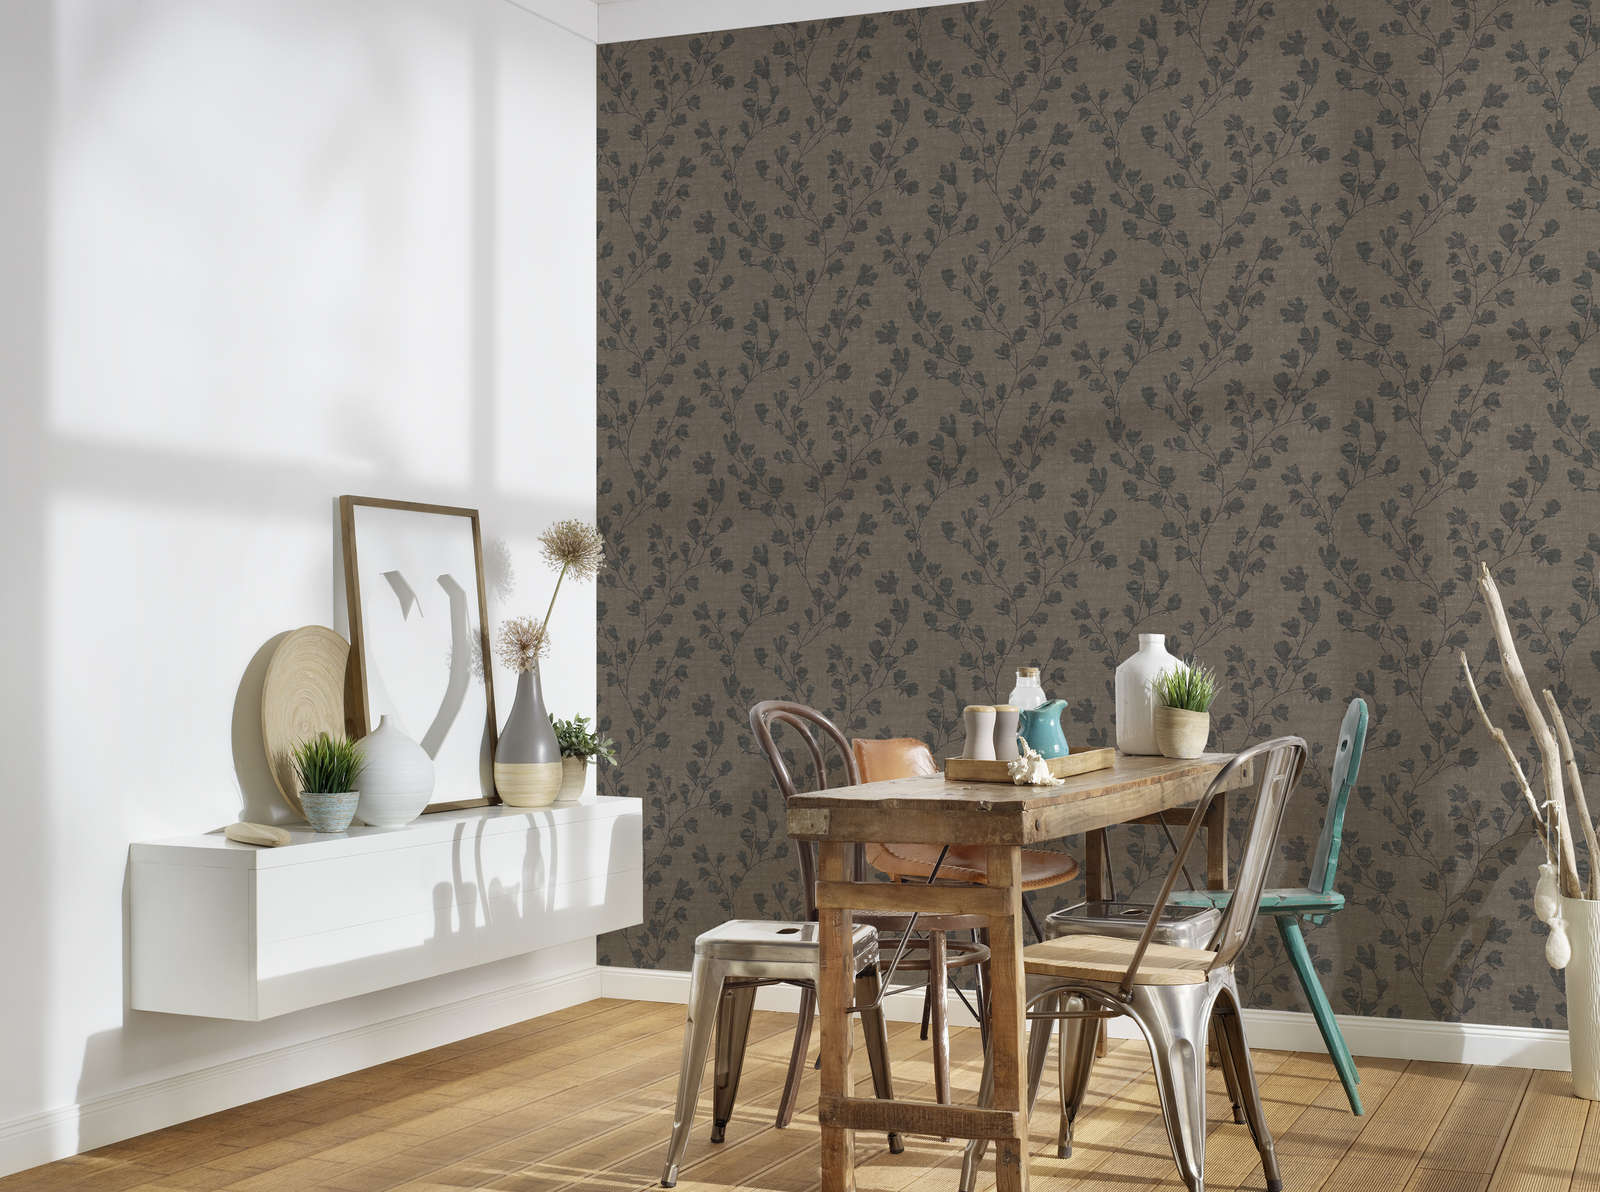             Non-woven wallpaper with leaf tendrils pattern - brown, black
        